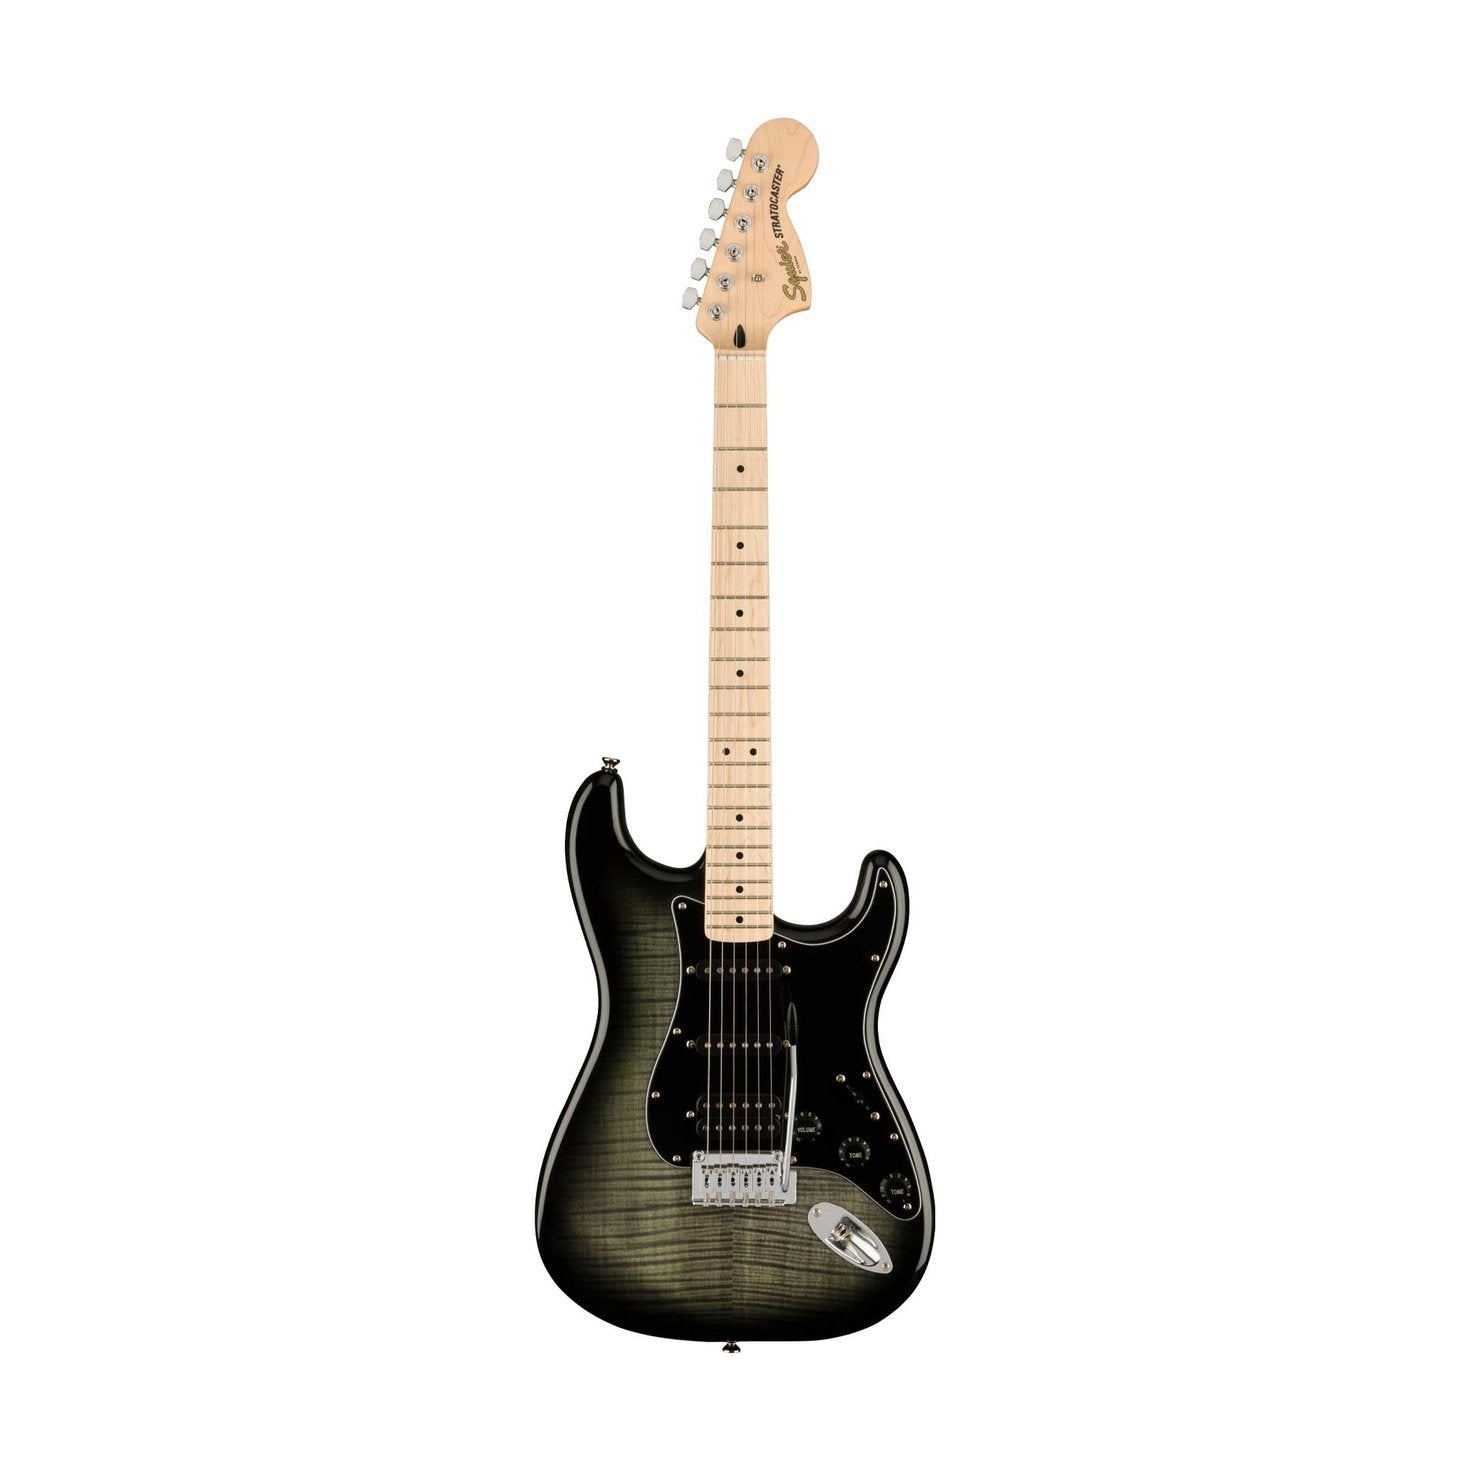 Squier Affinity Series HSS Stratocaster FMT Electric Guitar, Maple FB, Black Burst, SQUIER BY FENDER, ELECTRIC GUITAR, squier-electric-guitar-f03-037-8153-539, ZOSO MUSIC SDN BHD